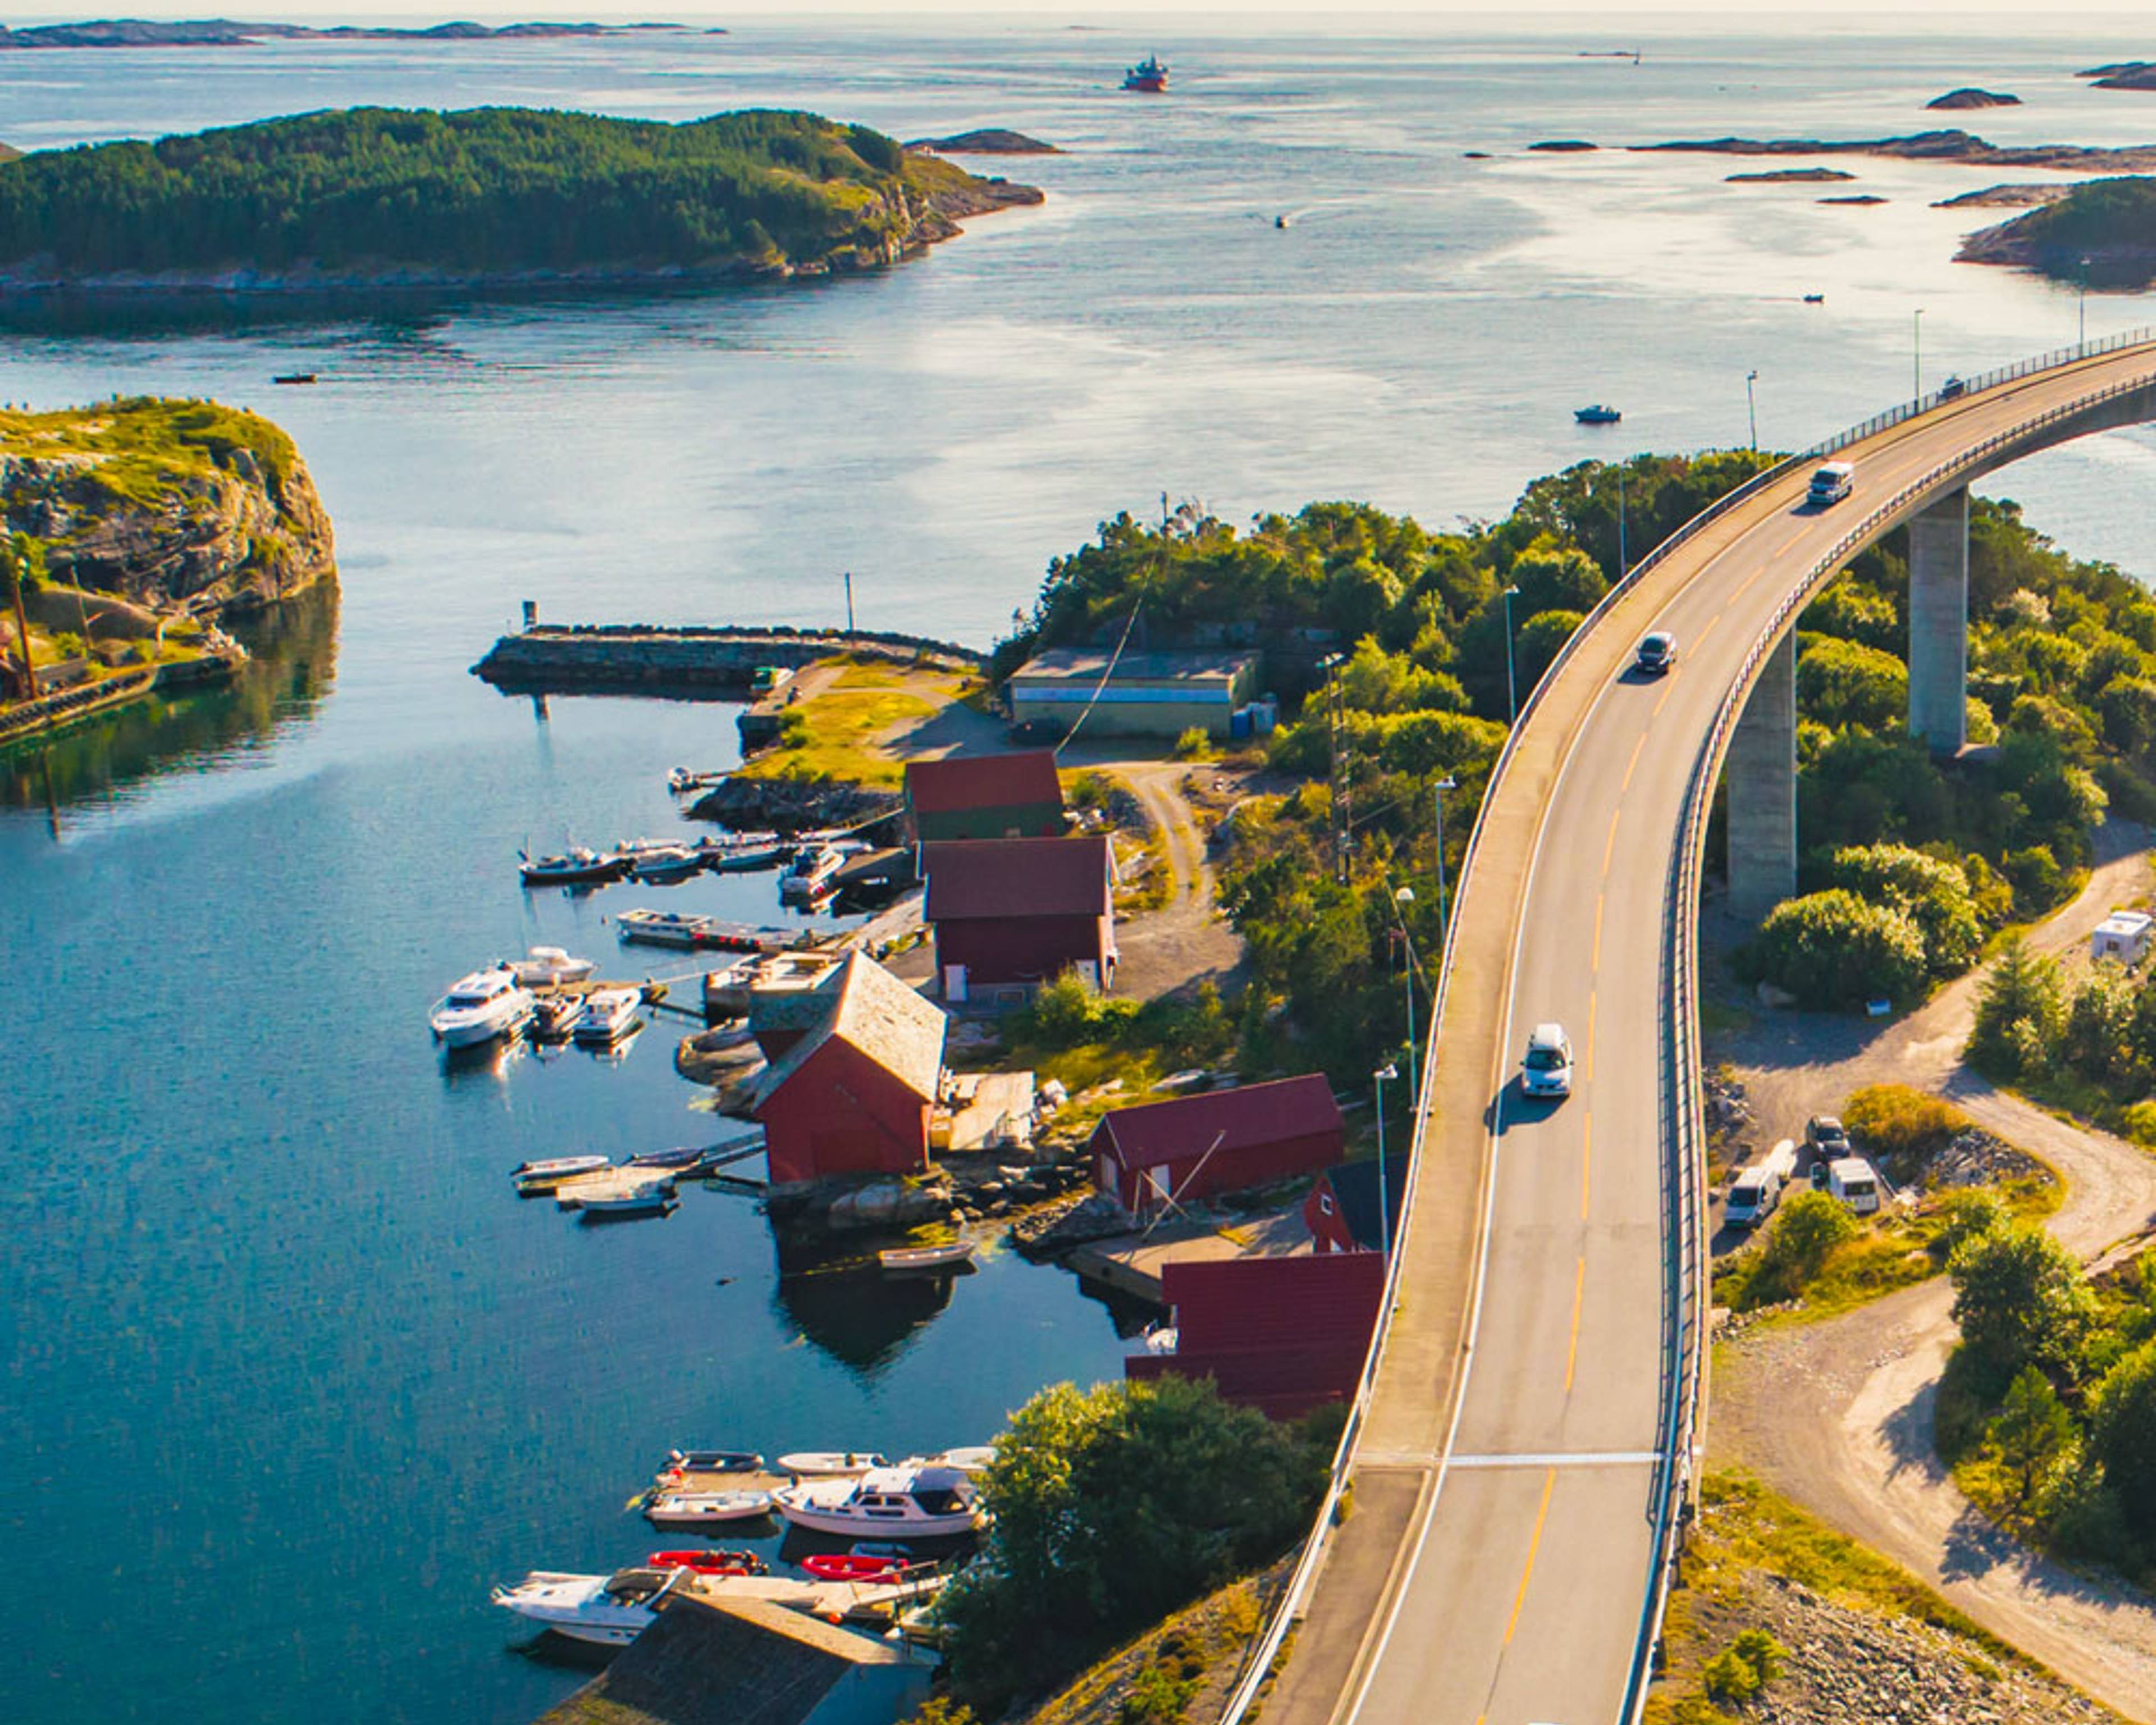 Design your perfect road trip with a local expert in Norway